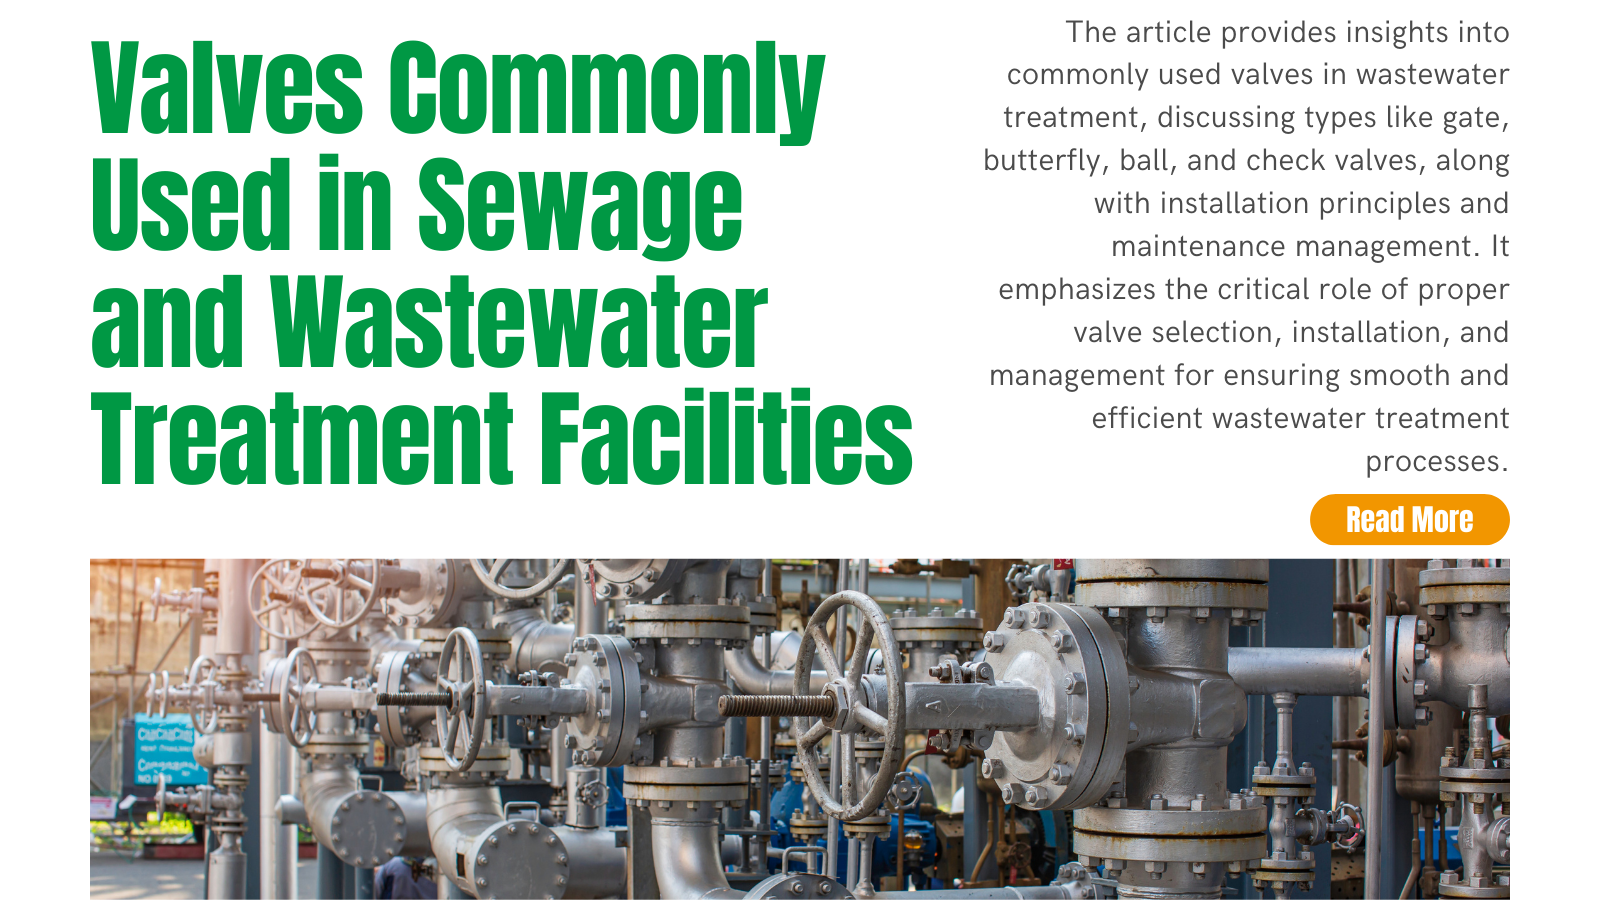 Valves Commonly Used in Sewage and Wastewater Treatment Facilities | INOX-TEK